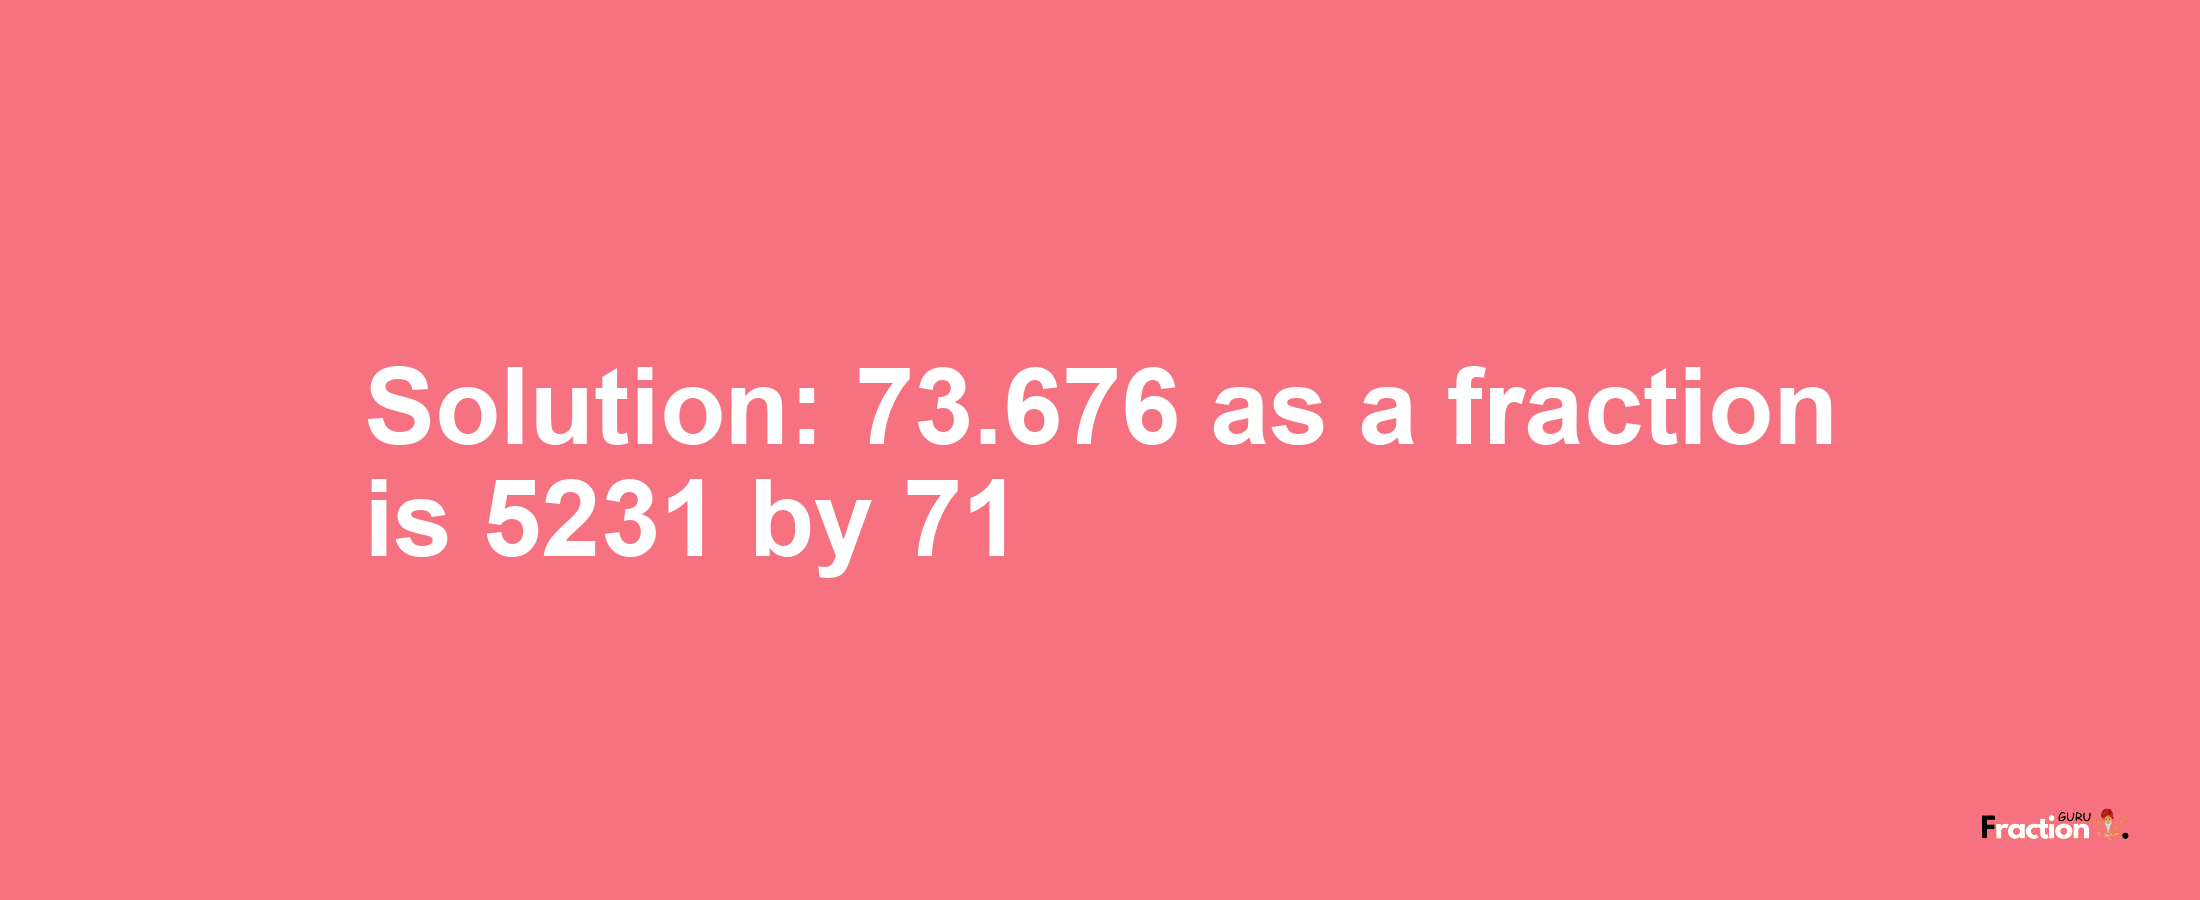 Solution:73.676 as a fraction is 5231/71